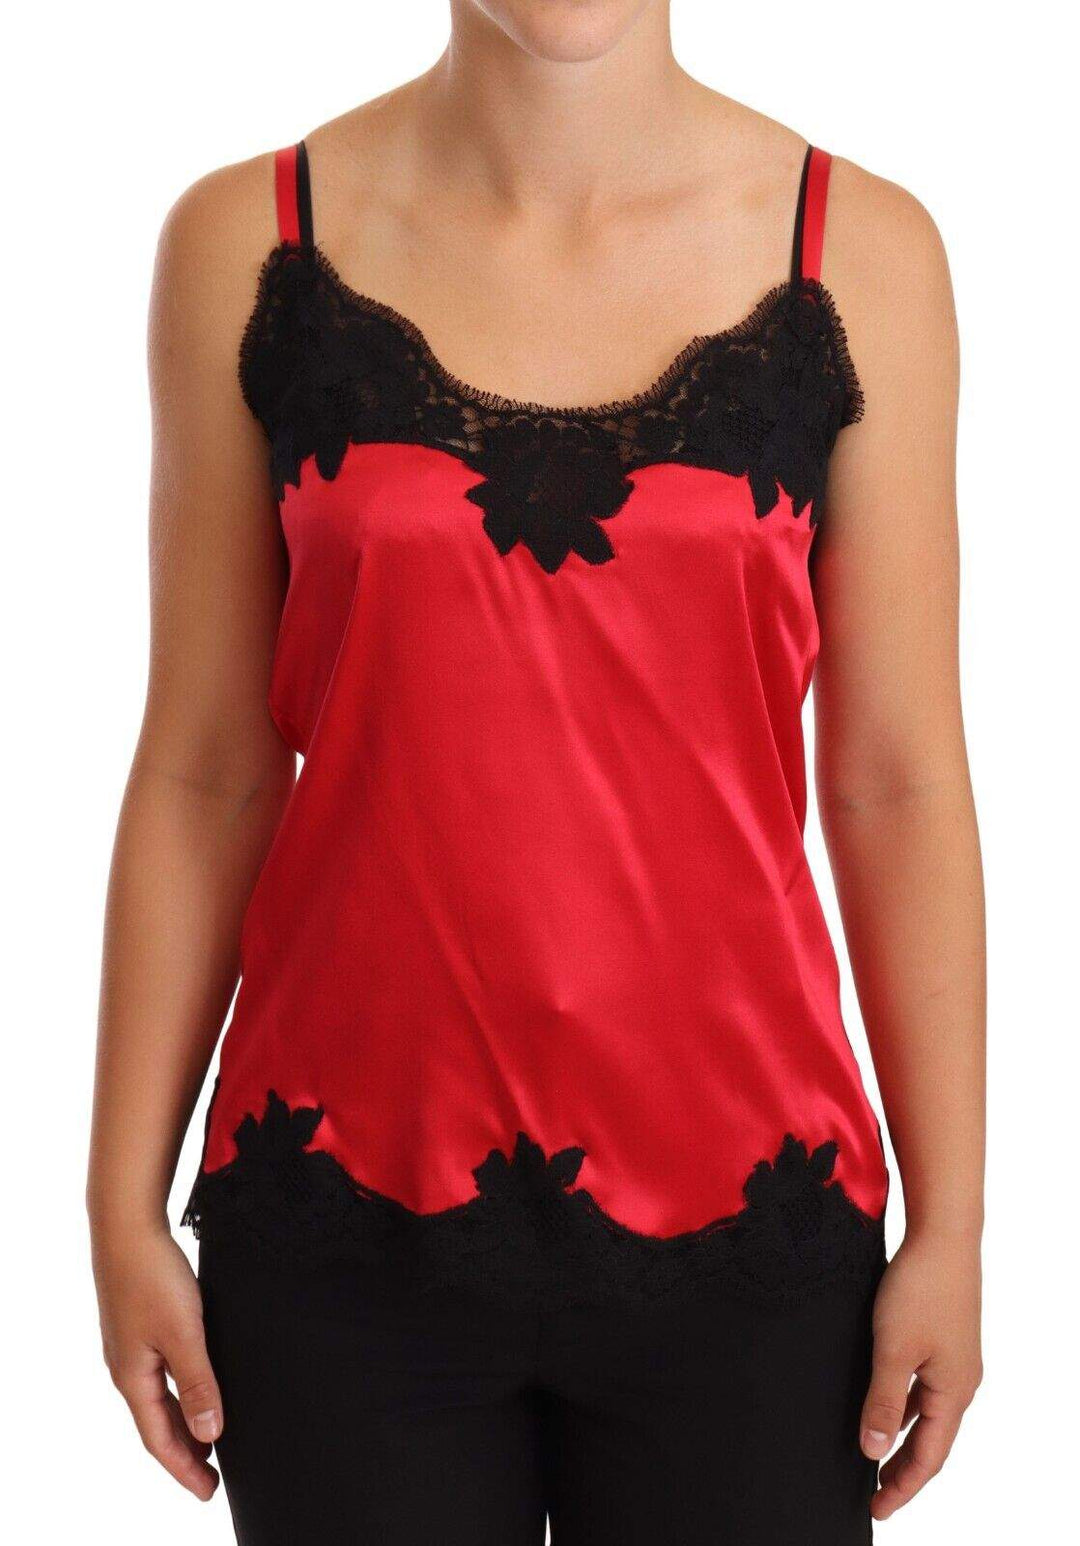 Dolce & Gabbana Red Floral Lace Silk Satin Camisole Lingerie Top Black and Red, Dolce & Gabbana, feed-1, IT2 | S, Sleepwear - Women - Clothing at SEYMAYKA